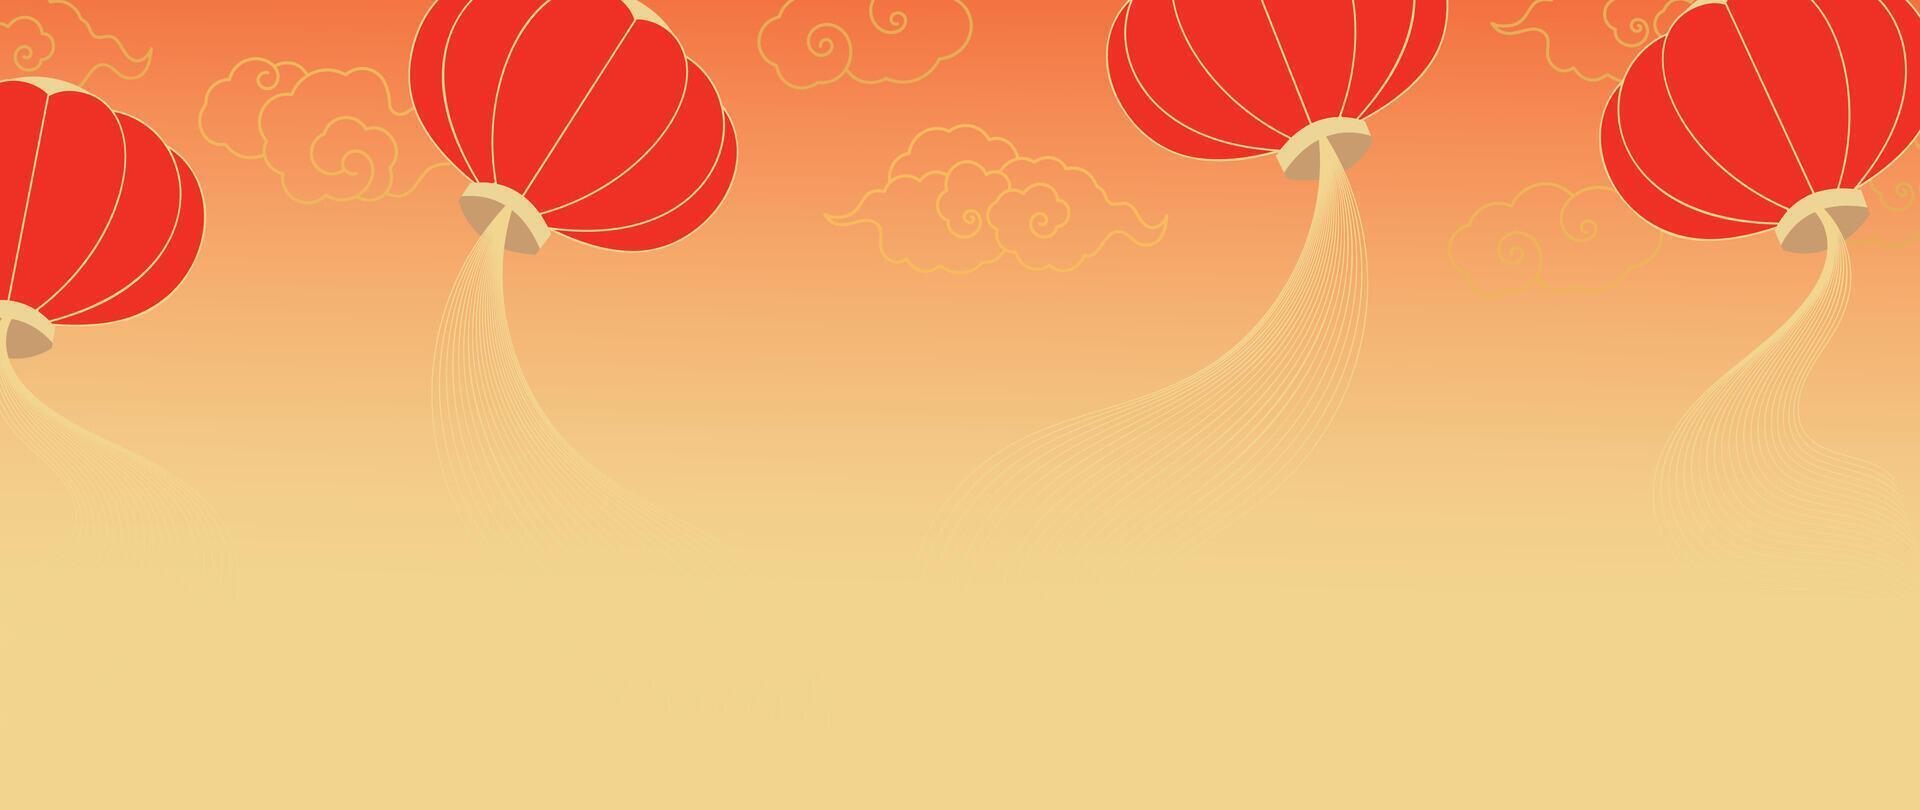 Happy Chinese new year background . Luxury wallpaper design with chinese lantern, cloud on gold background. Modern luxury oriental illustration for cover, banner, website, decor. vector